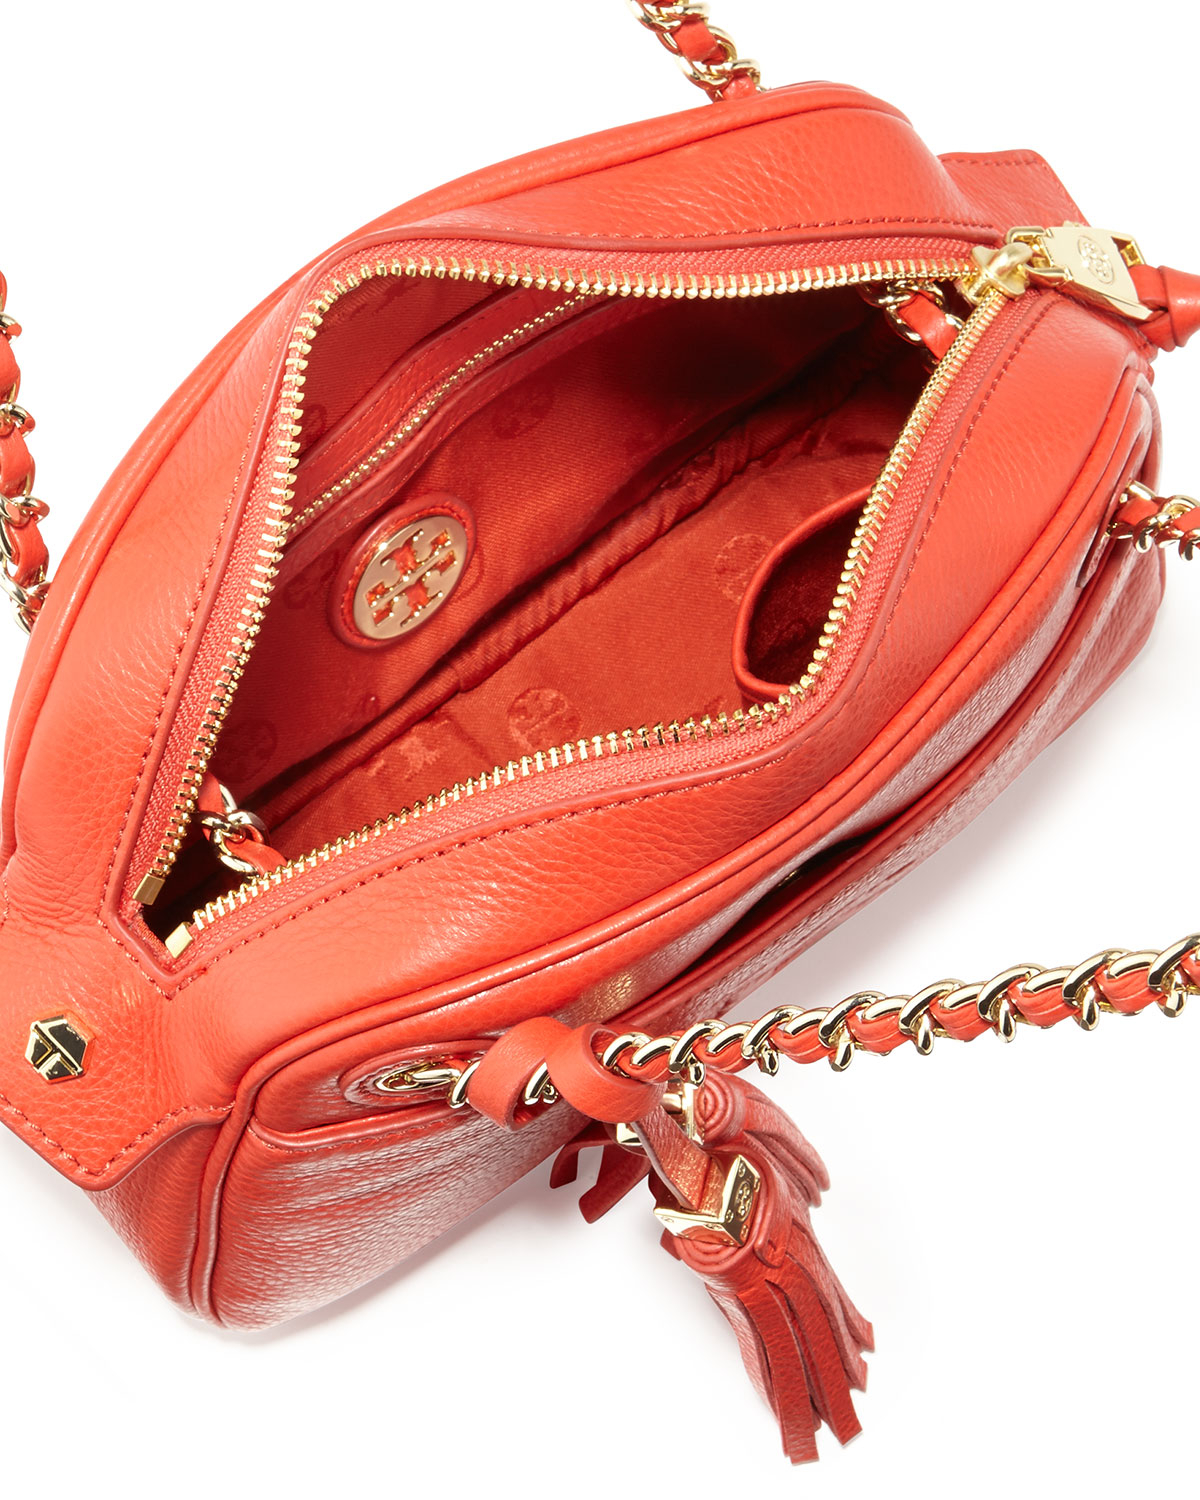 Tory burch Thea Chain-strap Crossbody Bag in Red | Lyst